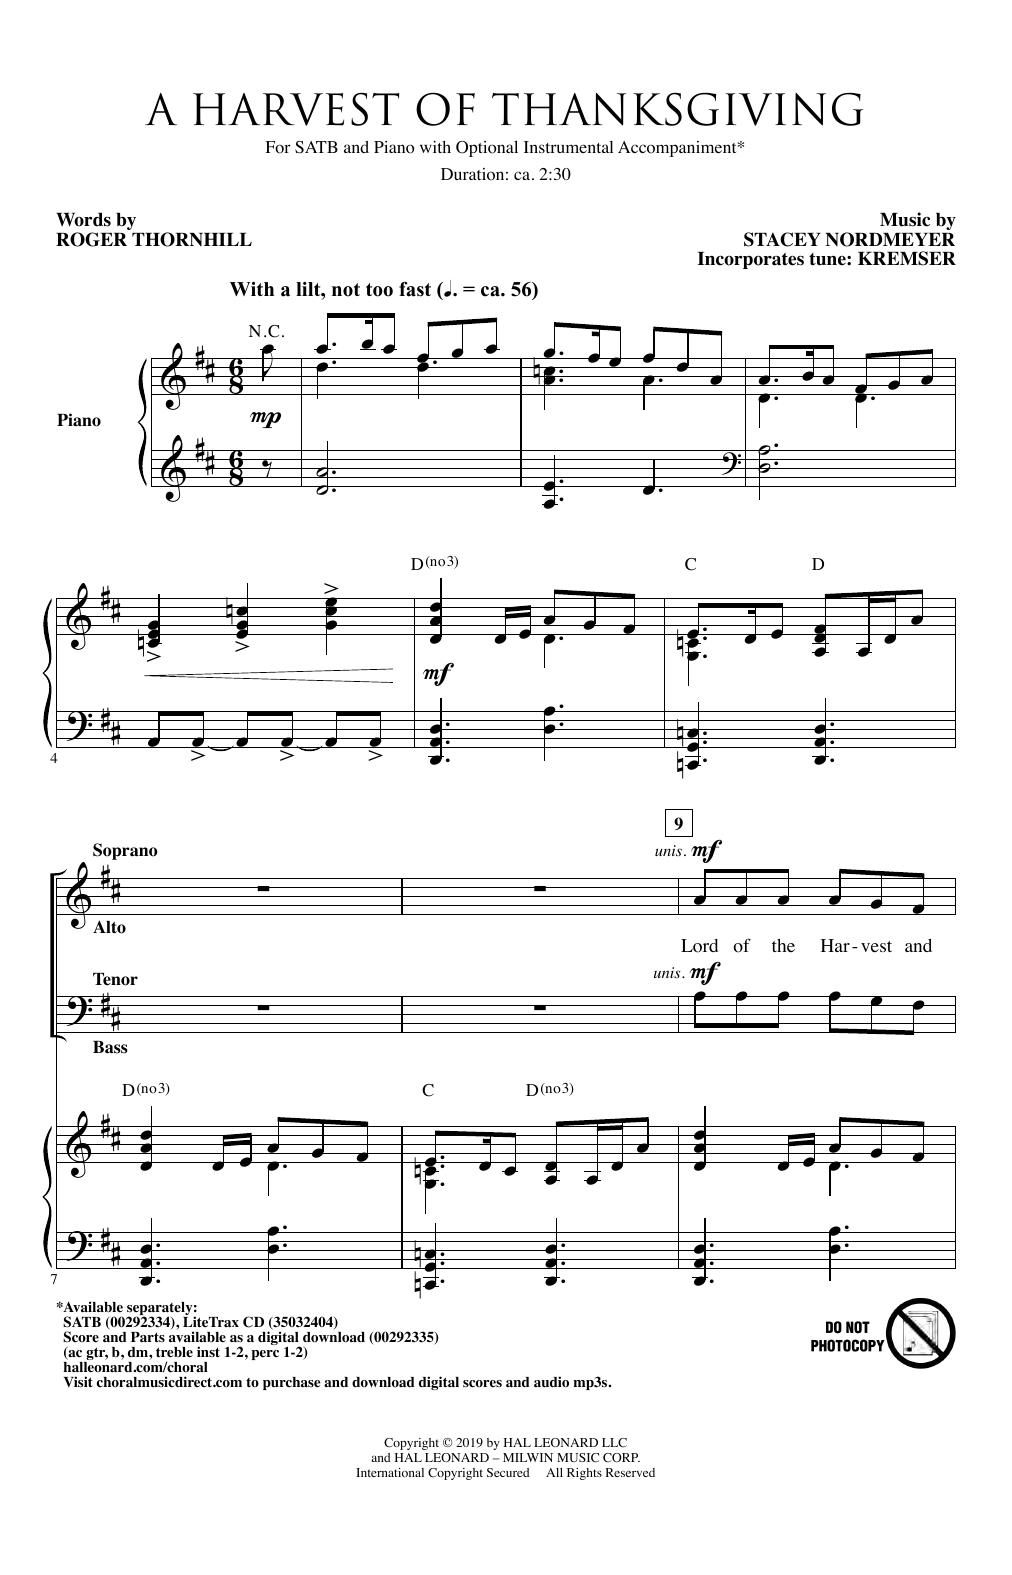 Download Roger Thornhill & Stacey Nordmeyer A Harvest Of Thanksgiving Sheet Music